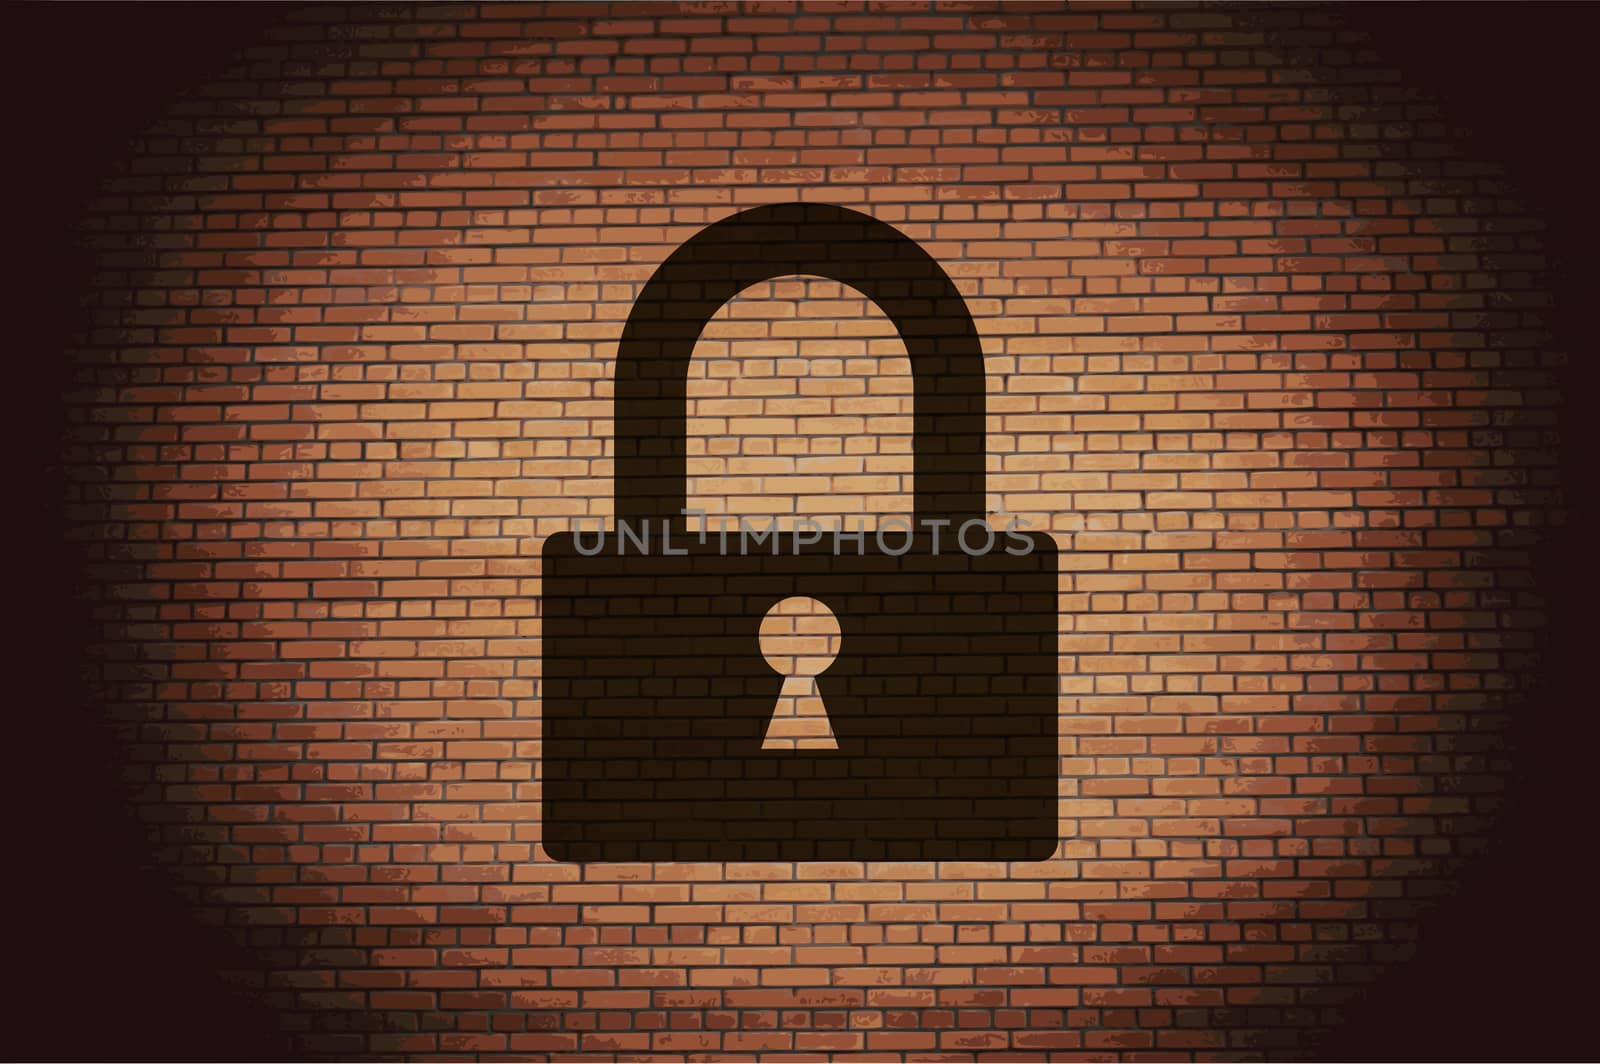 padlock icon flat design with abstract background by serhii_lohvyniuk